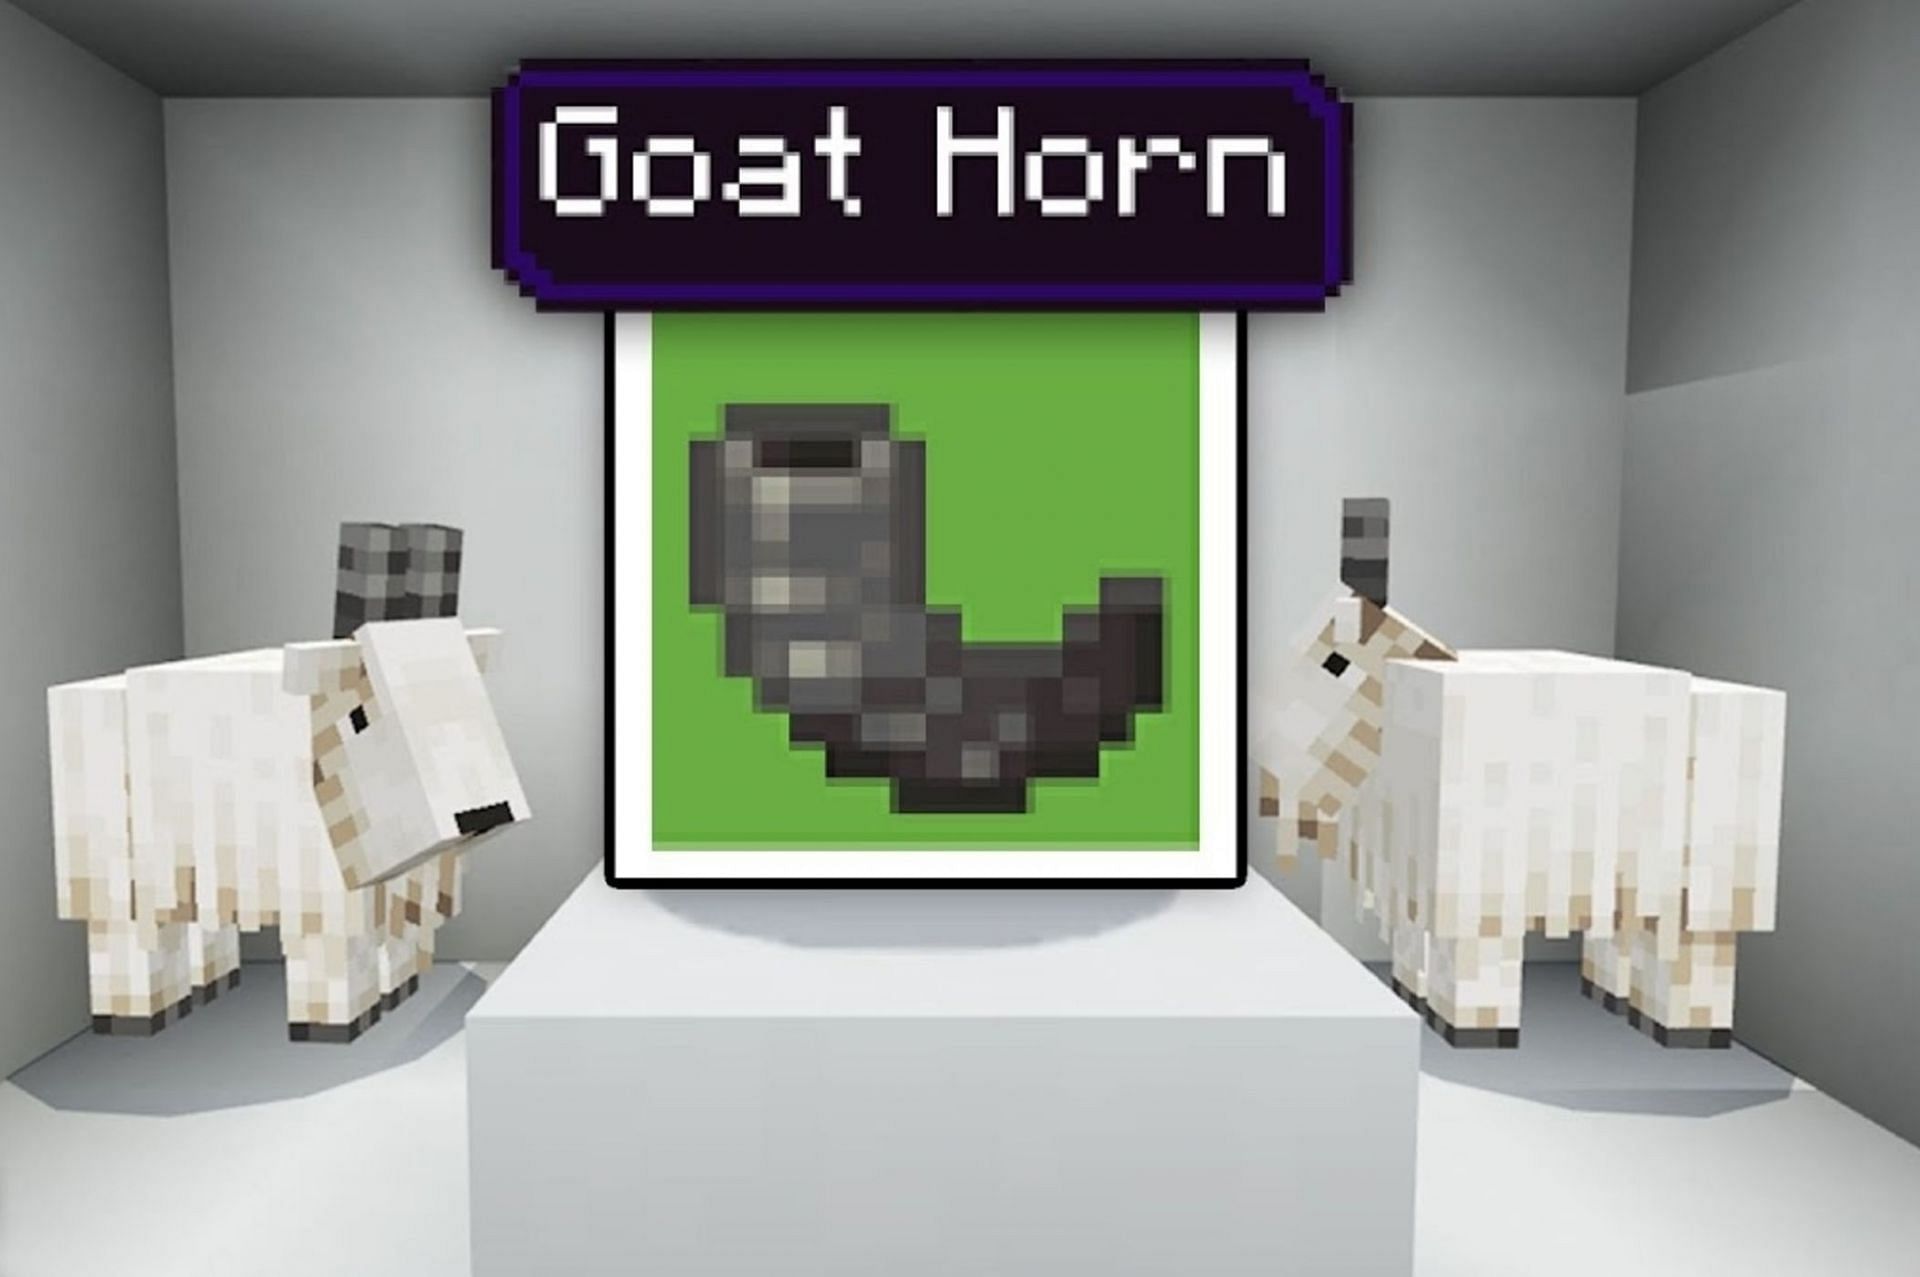 Goat horns can currently be acquired in Minecraft: Bedrock Edition (Image via Wattles/Youtube)